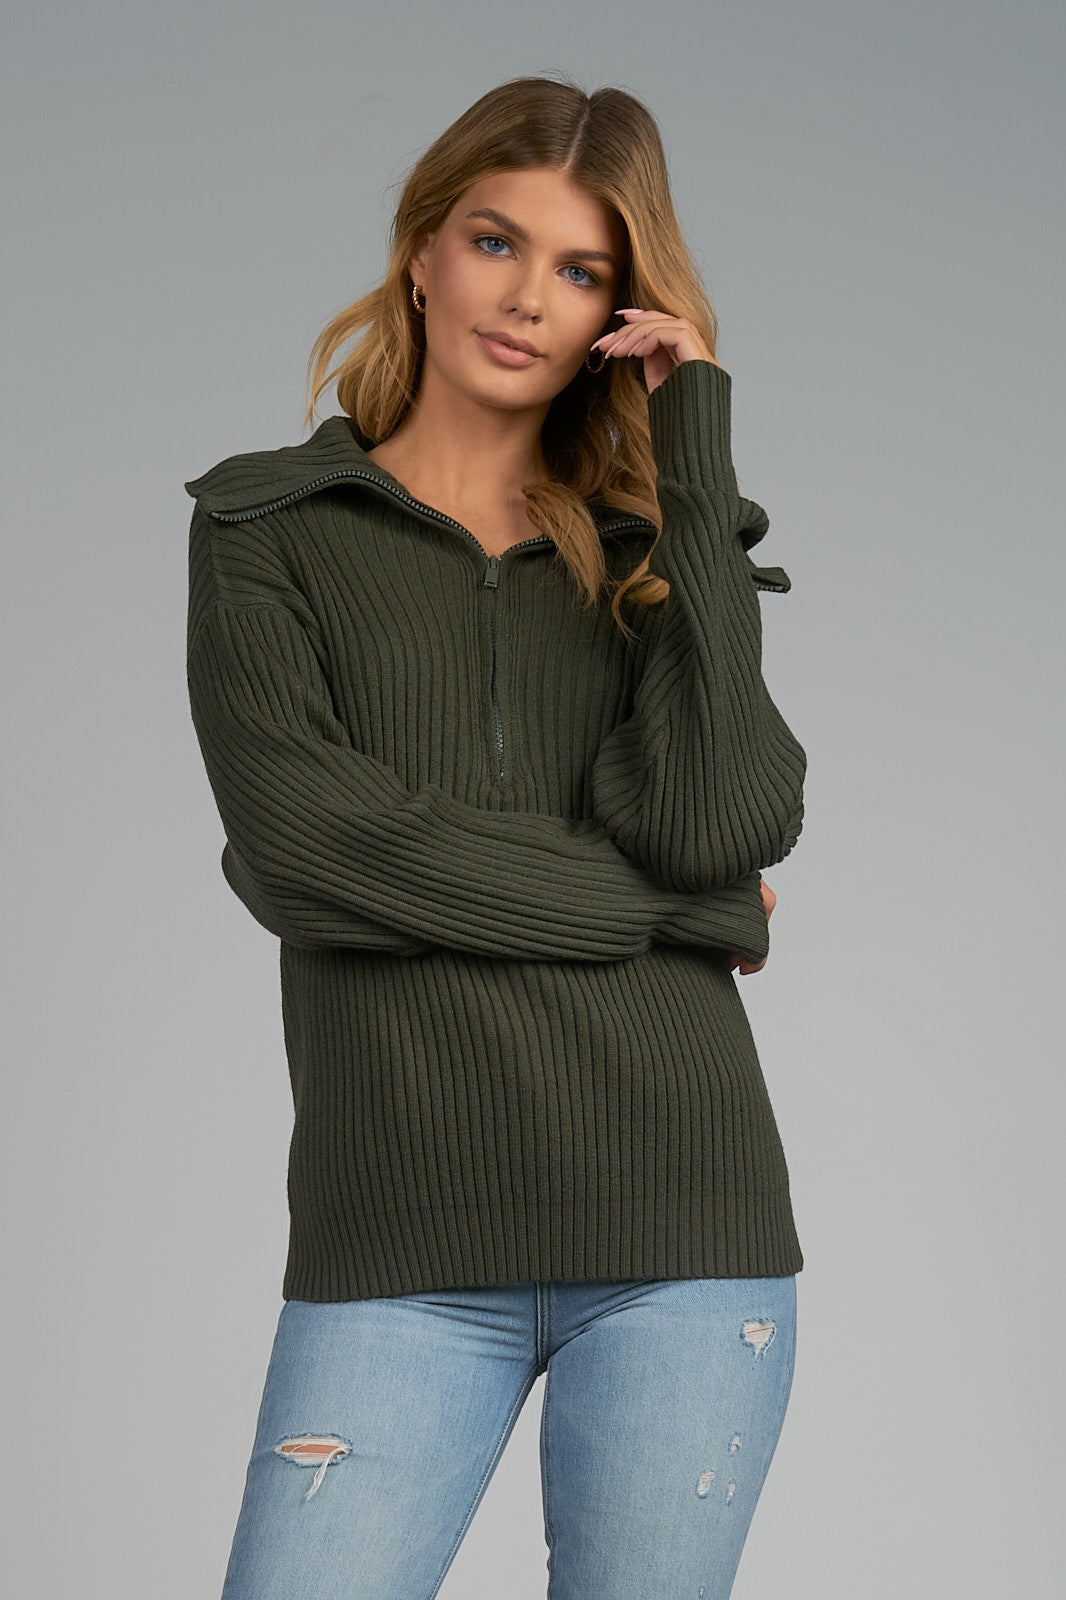 Elan Olive Green Ribbed Zipper Front Sweater